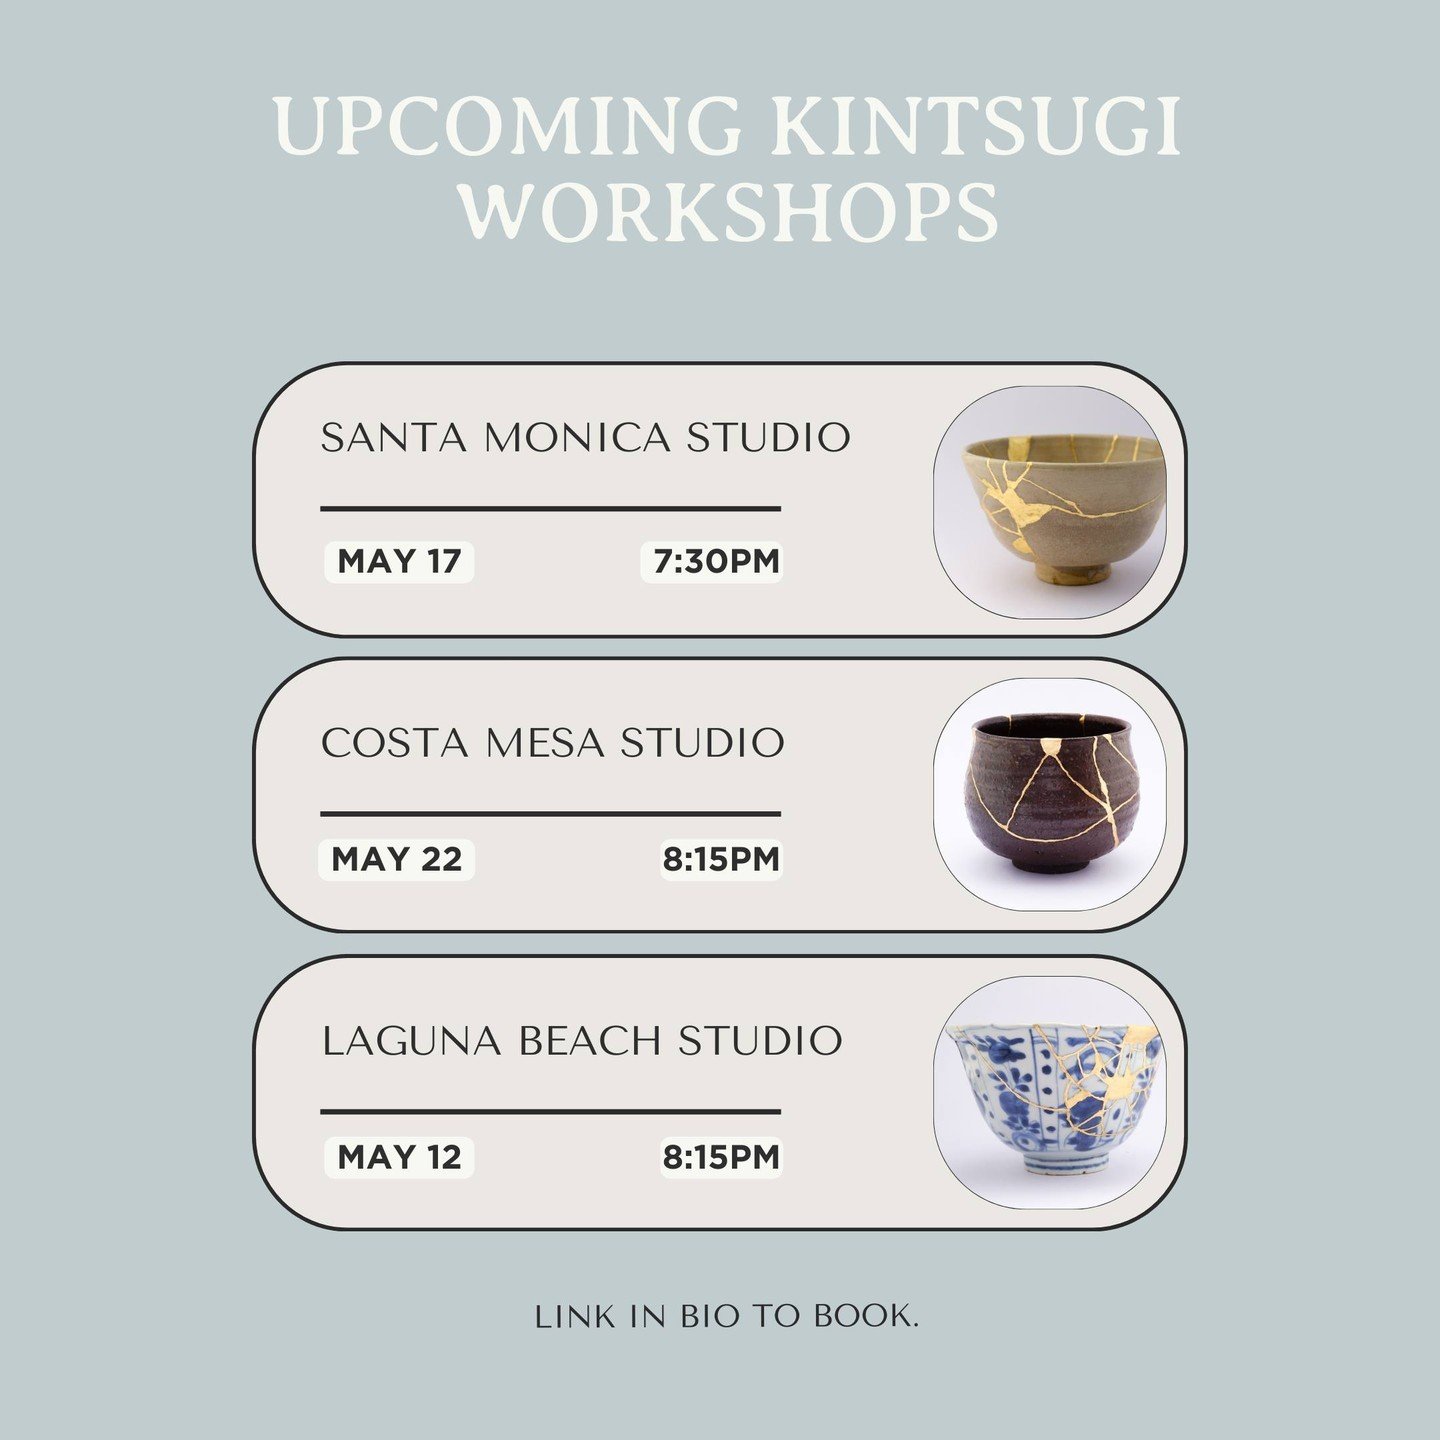 3 workshops, 3 different locations! ⁠
⁠
📅 How to book: click on post within bio link⁠
⁠
ℹ️ About workshop: Discover the history and philosophy of kintsugi to repair ceramics using gold dust, and patience as we guide you through every step of the way